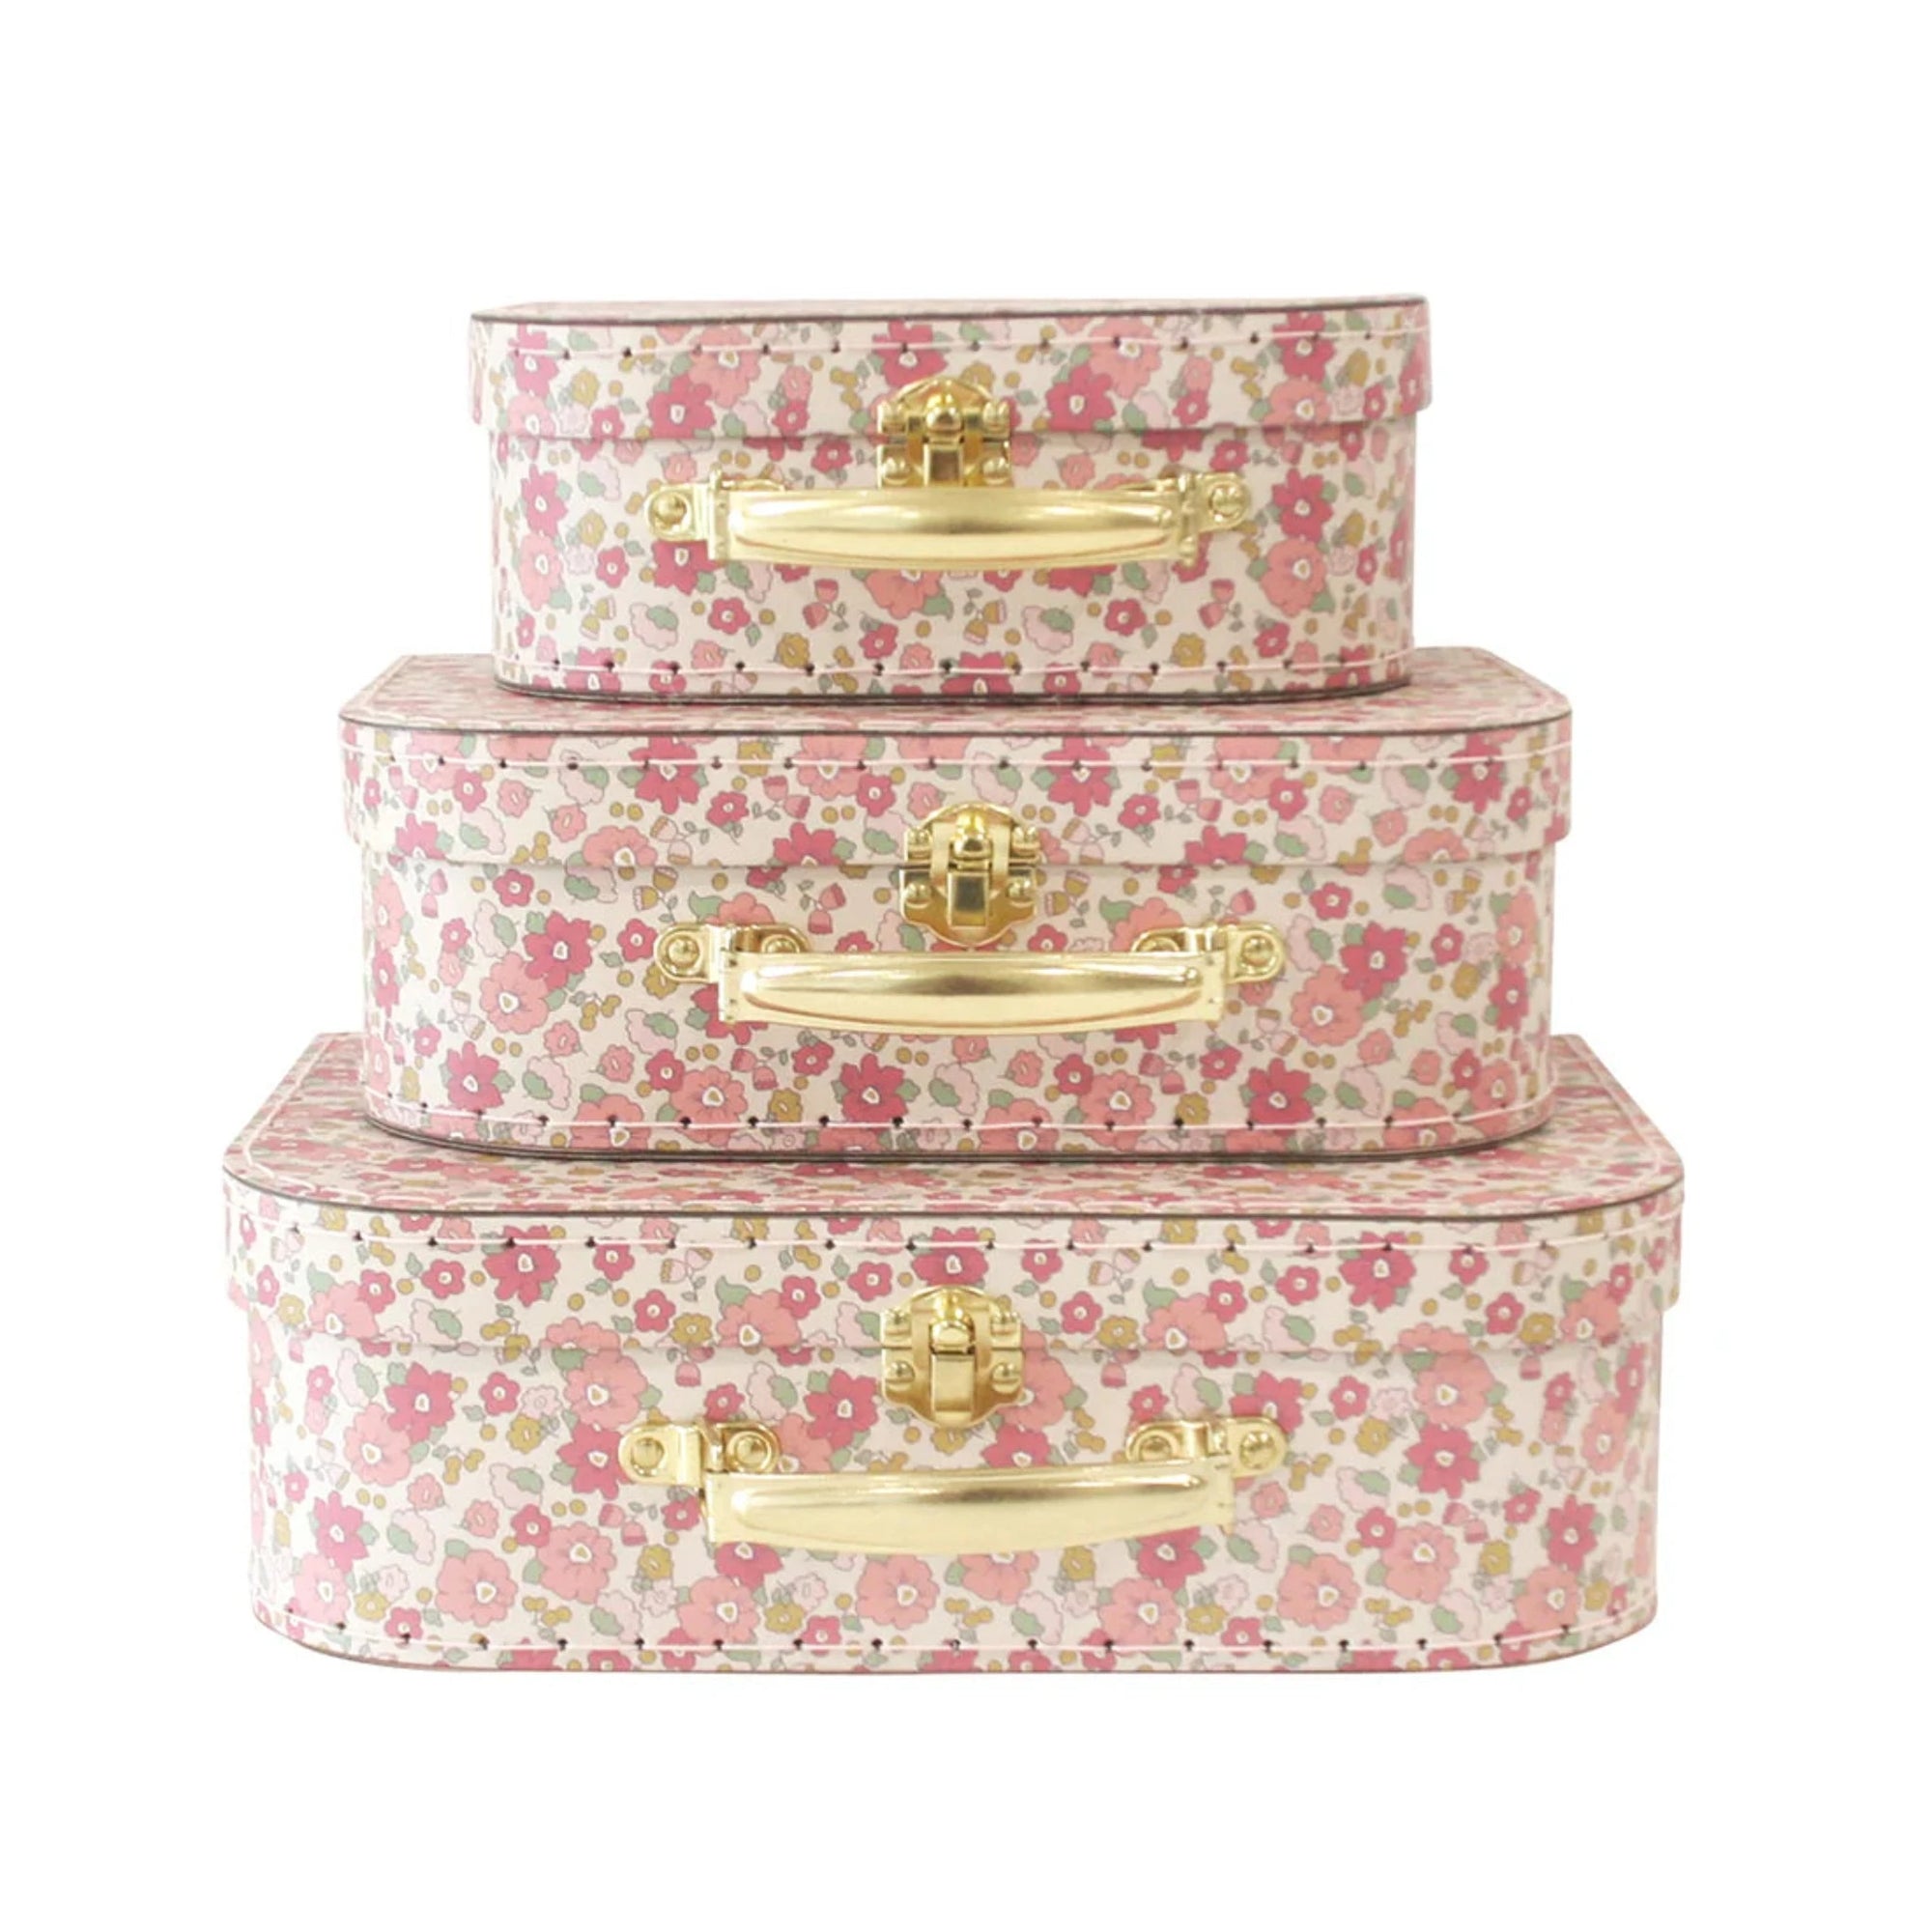 Alimrose Rose Garden Carry Cases - sold separately